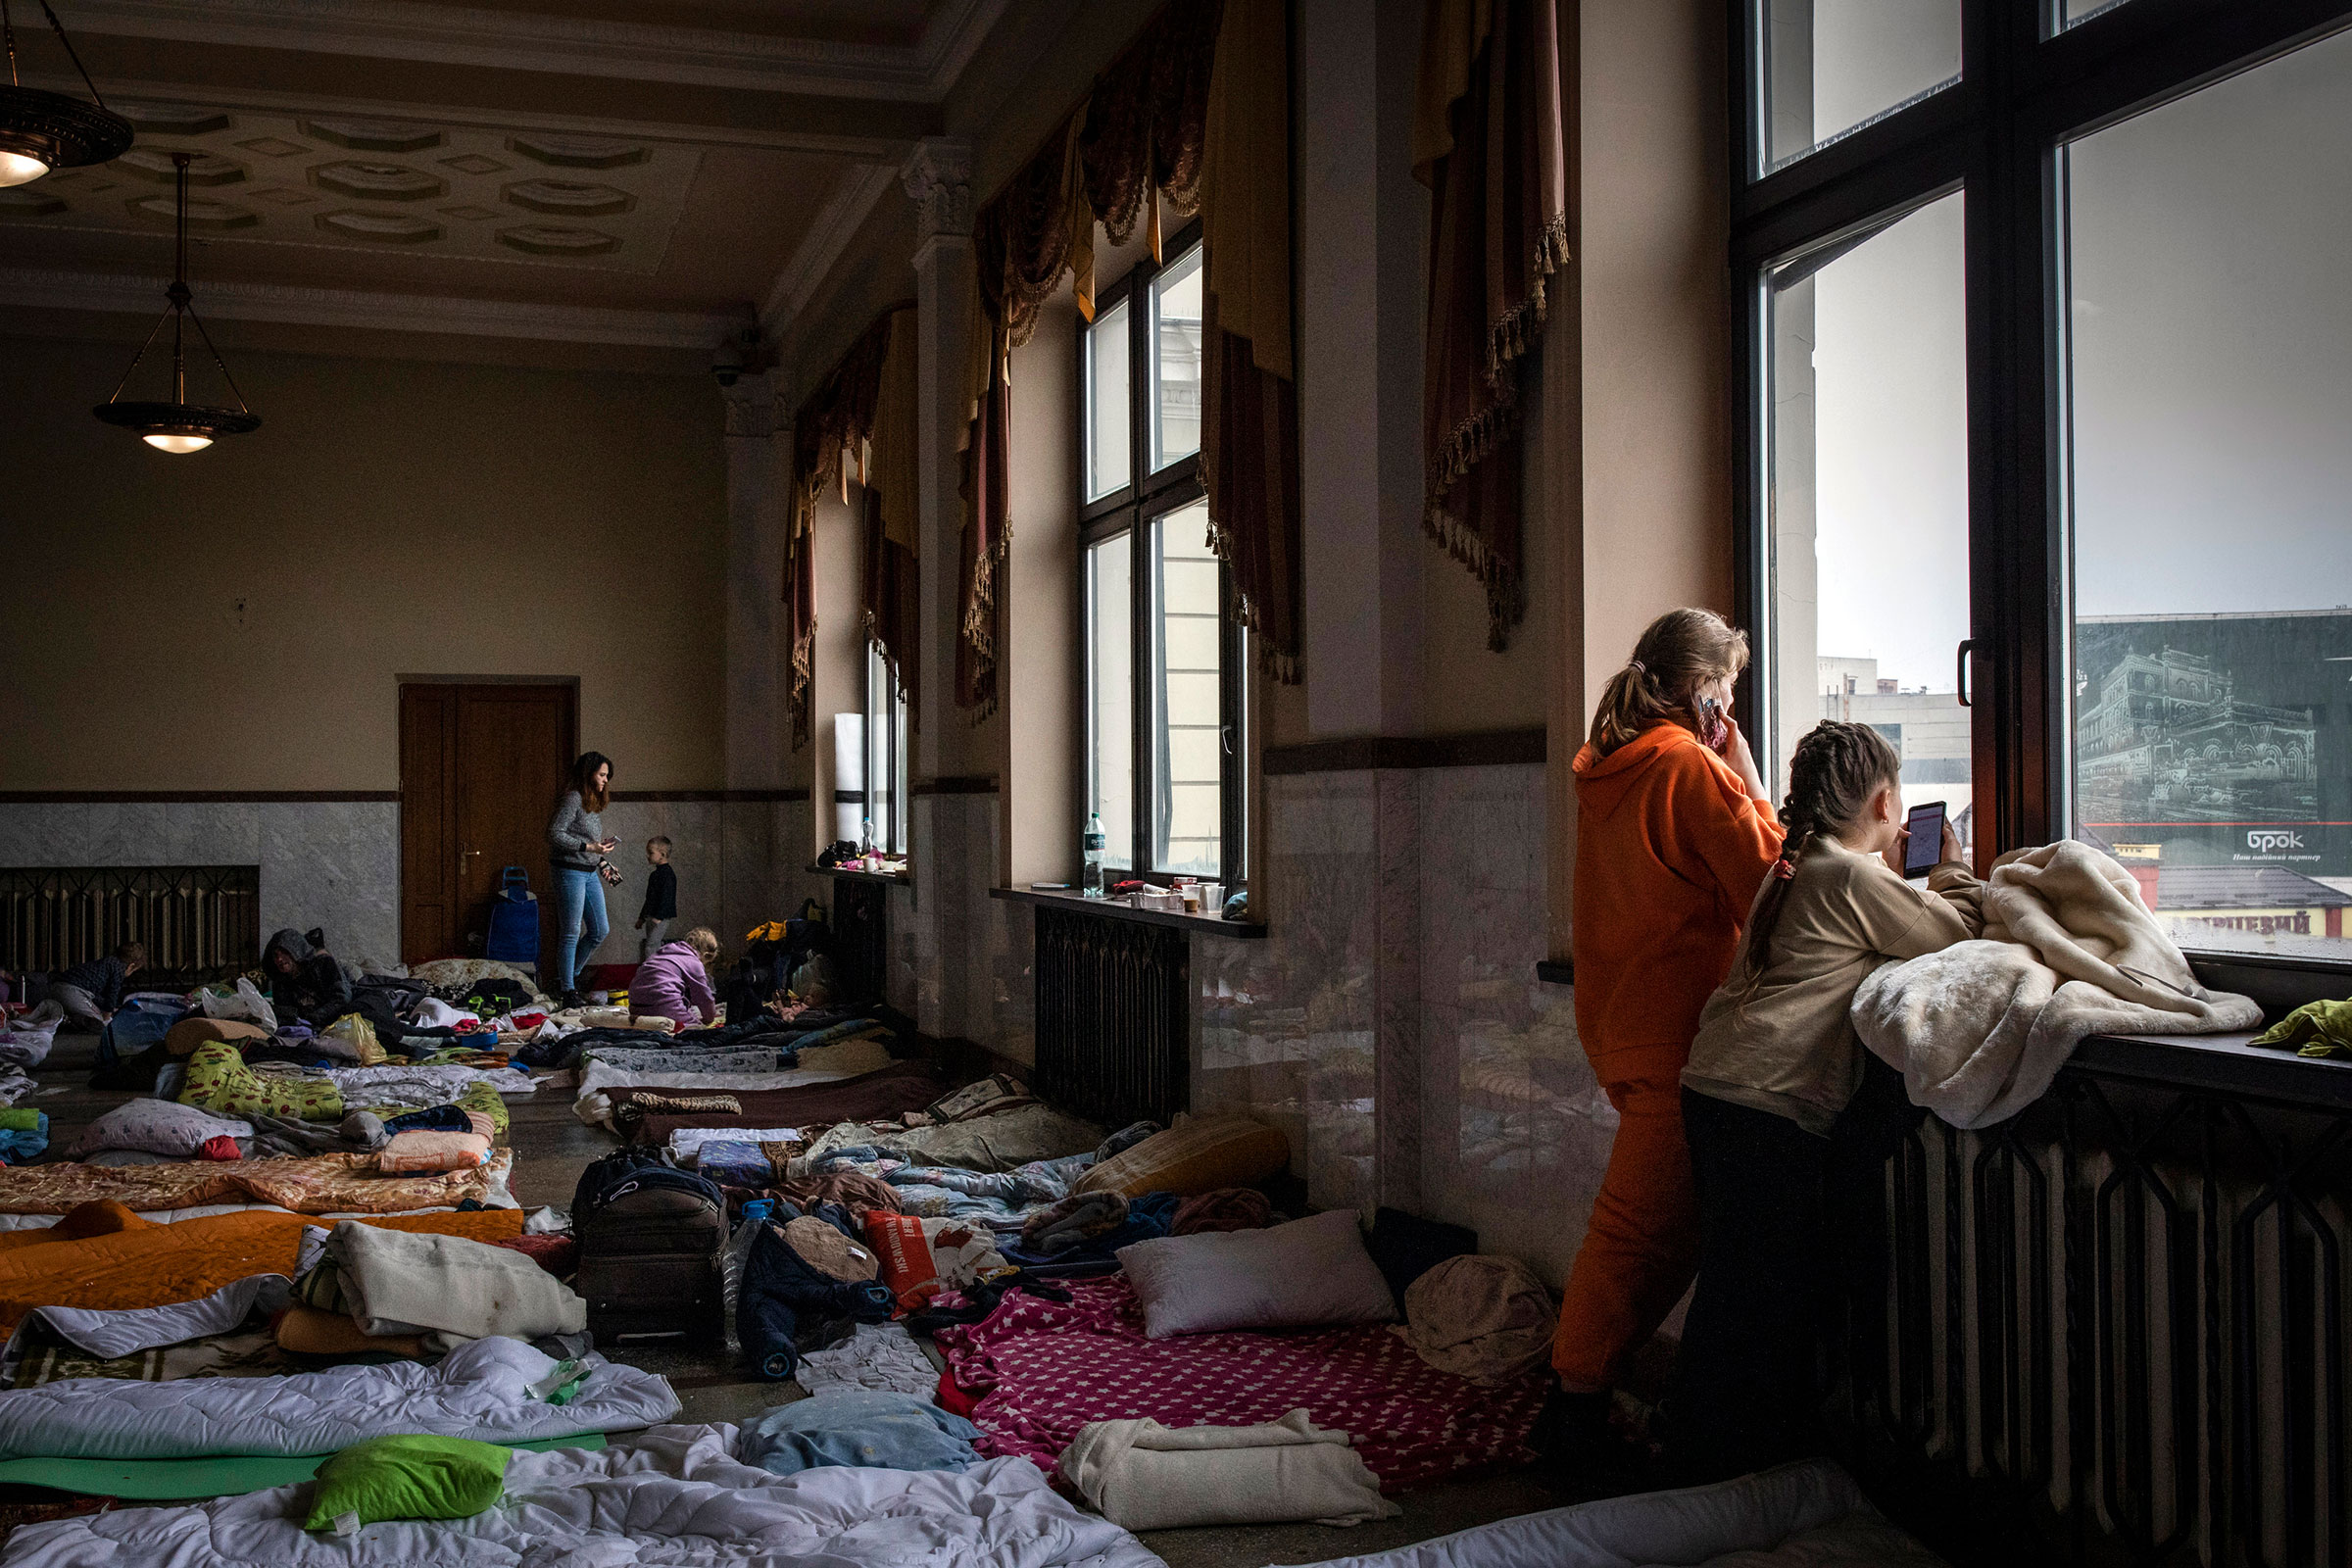 Women and children, many of them from the besieged city of Kharkiv in eastern Ukraine, shelter in a waiting hall at the train station in Lviv on March 7.